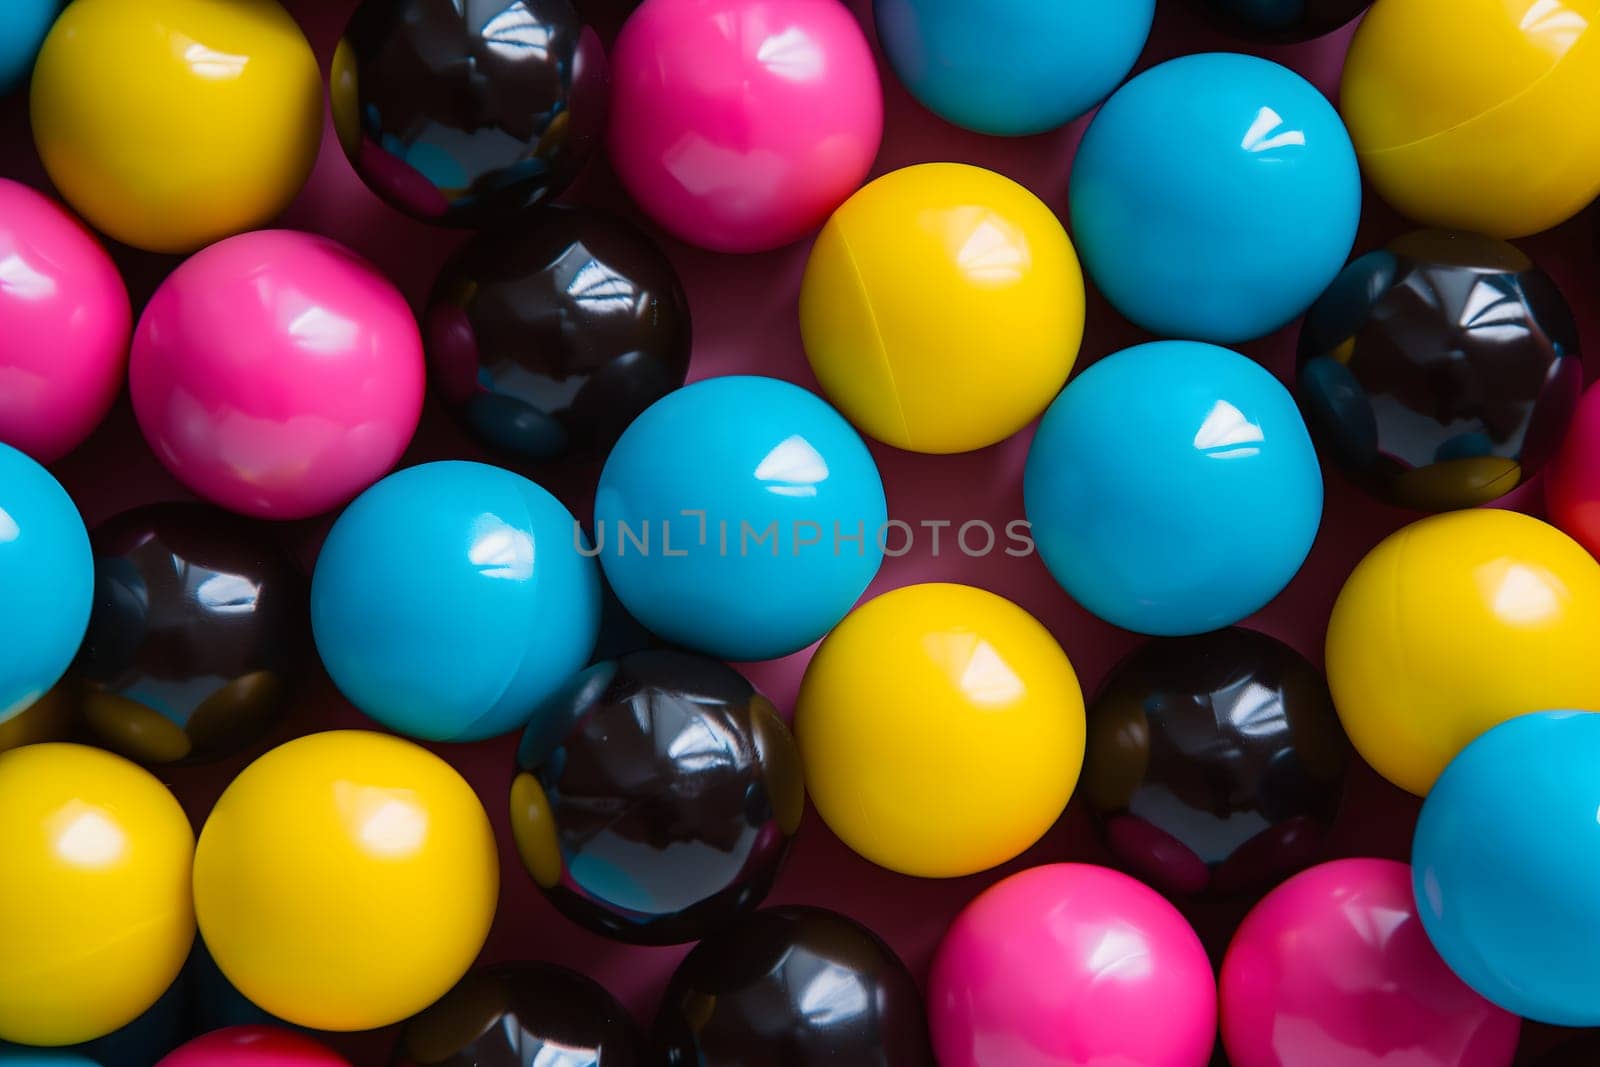 Full-frame background of piled colorful plastic balls. Neural network generated image. Not based on any actual scene or pattern.